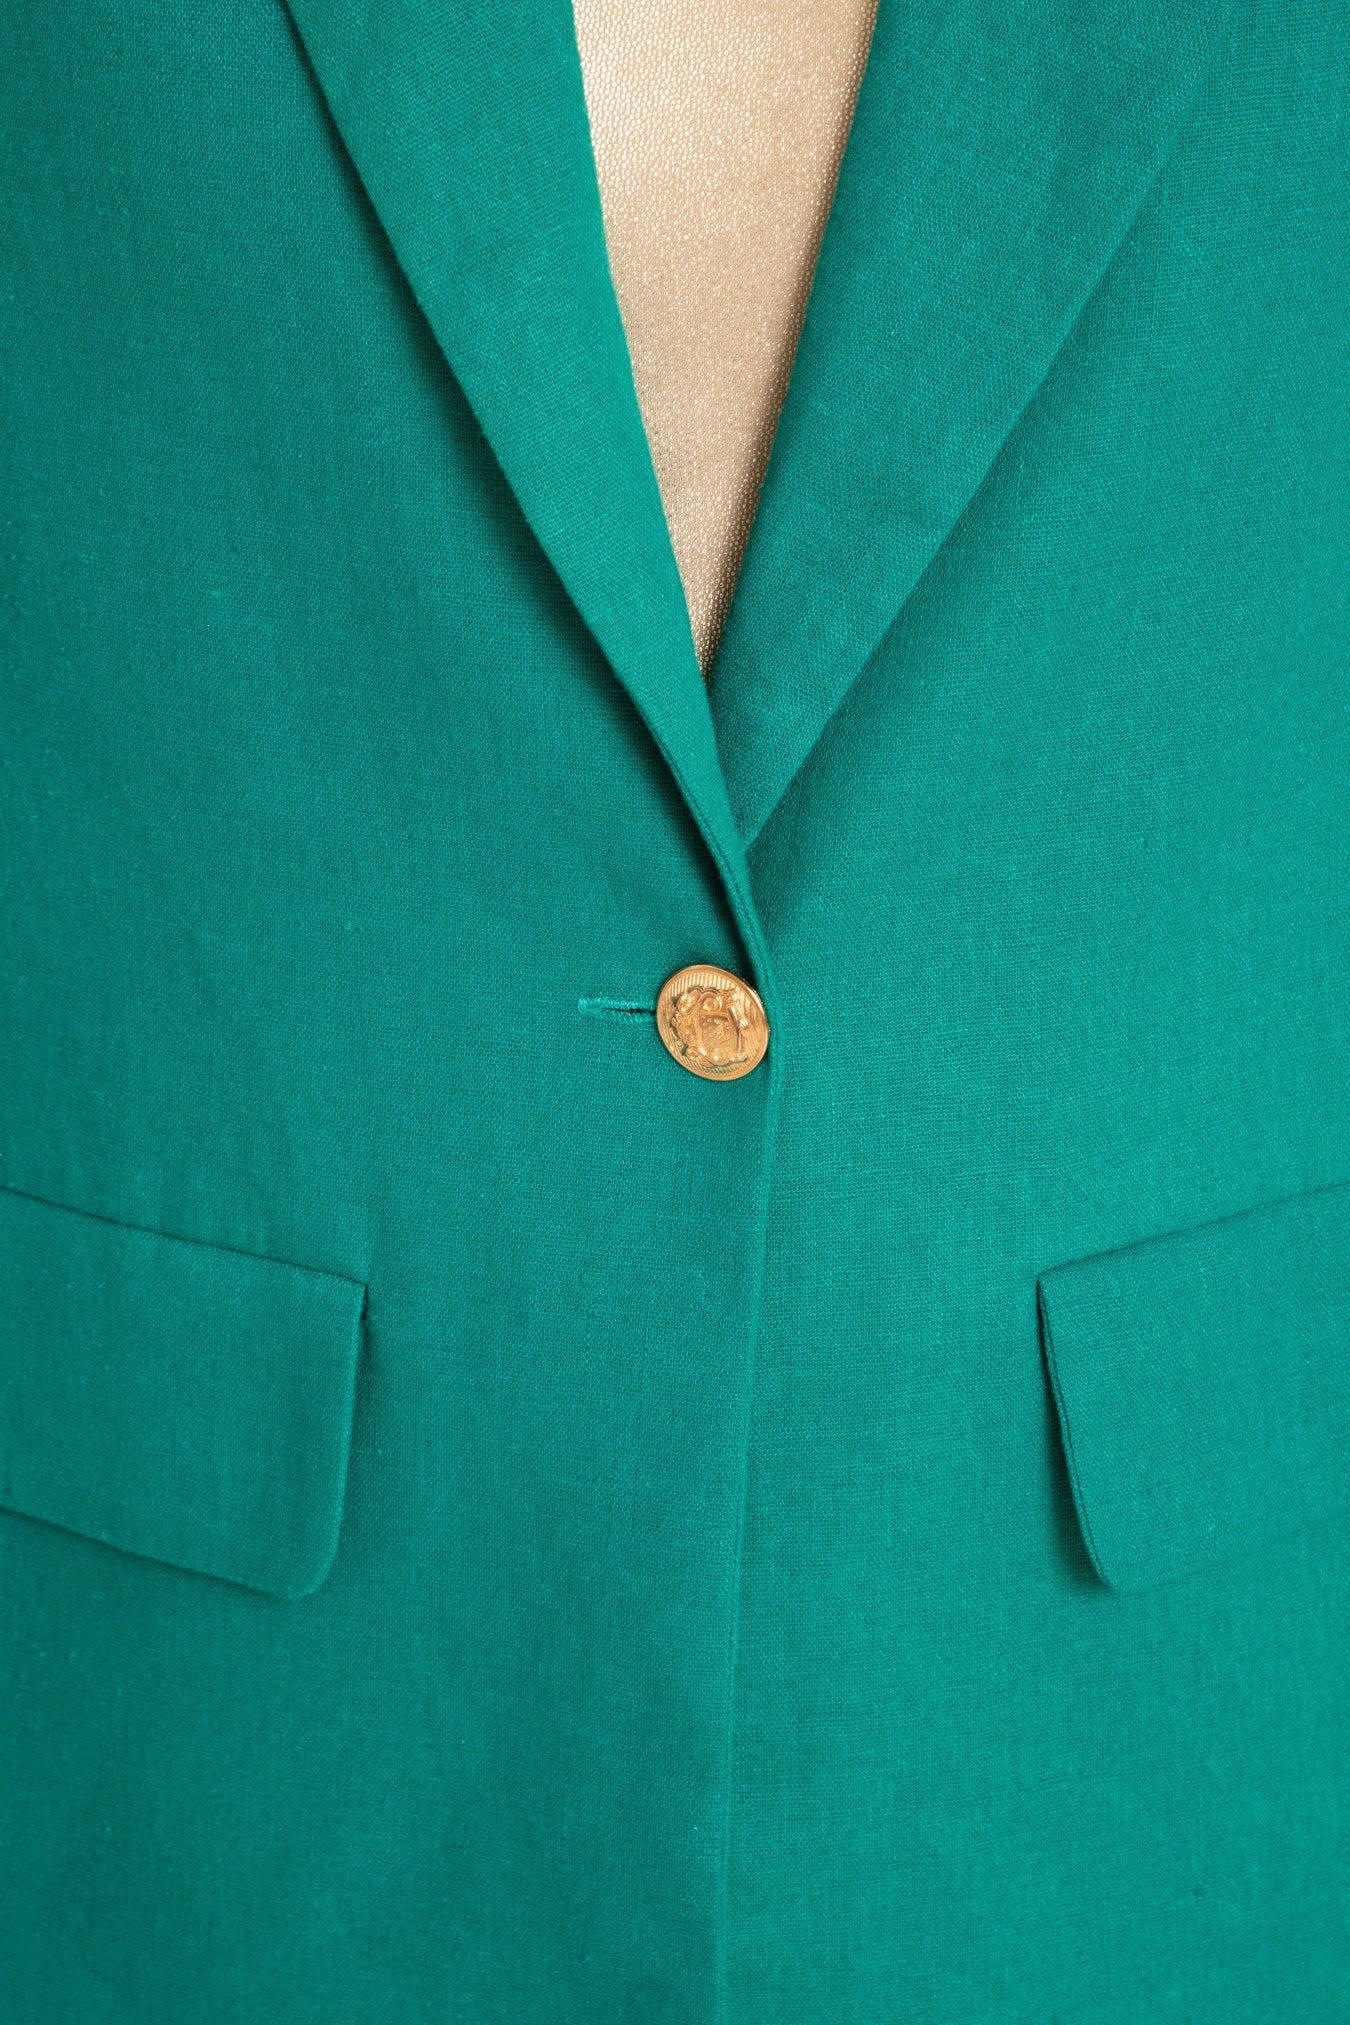 Solid Turquoise Blazer With Button Button Detail 2